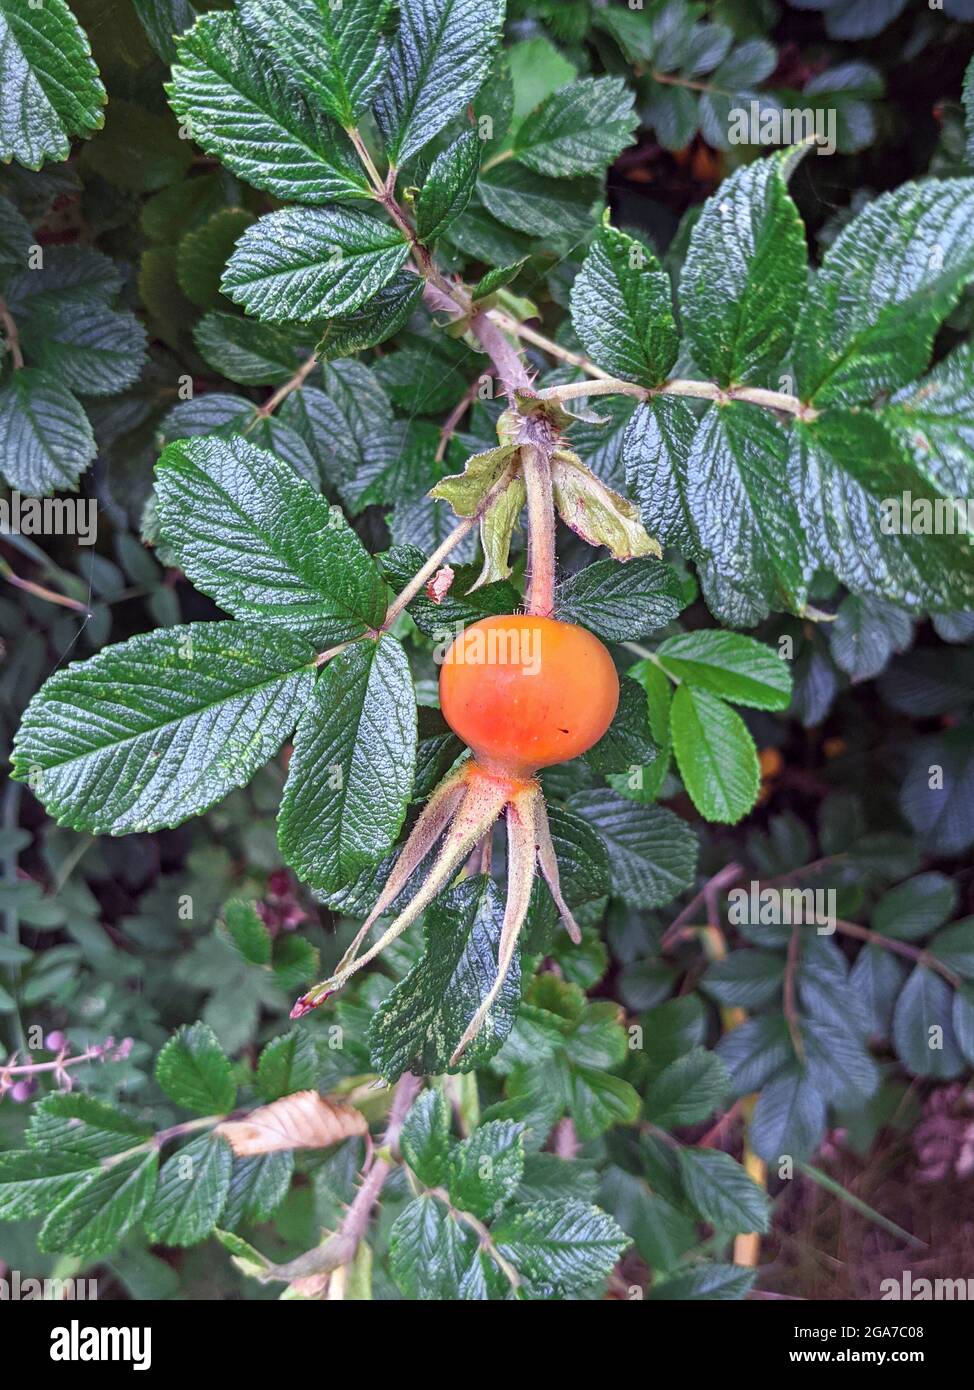 Large orange rose hip and green leaves Stock Photo